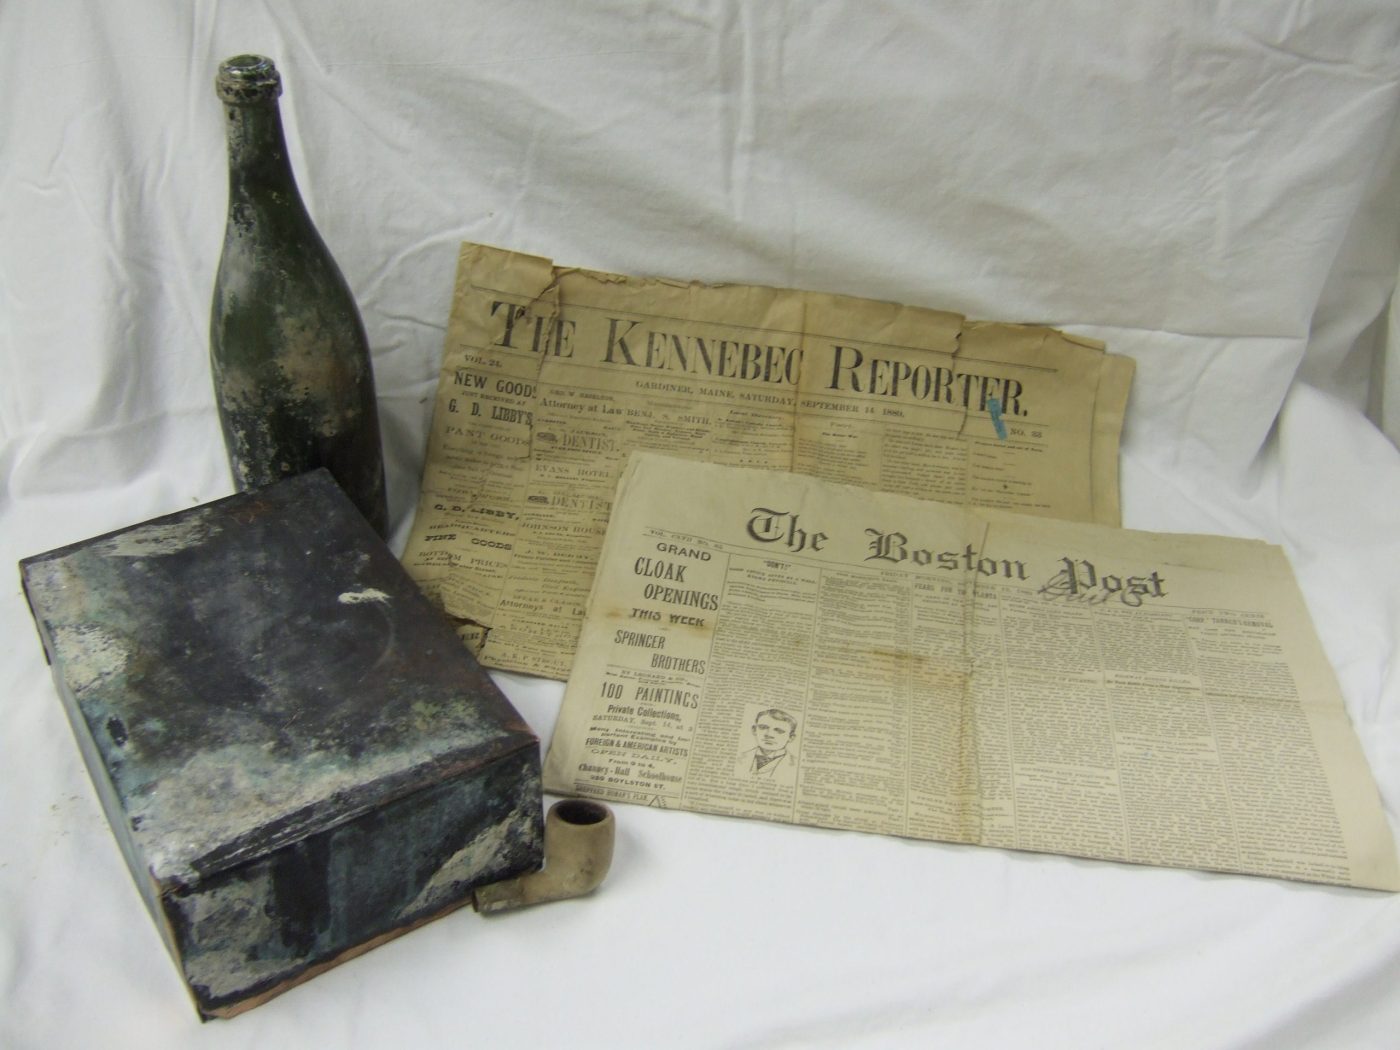 Time capsule, with newspapers dated September 15, 1889, and other objects found in National Cemetery monument. (NCA)